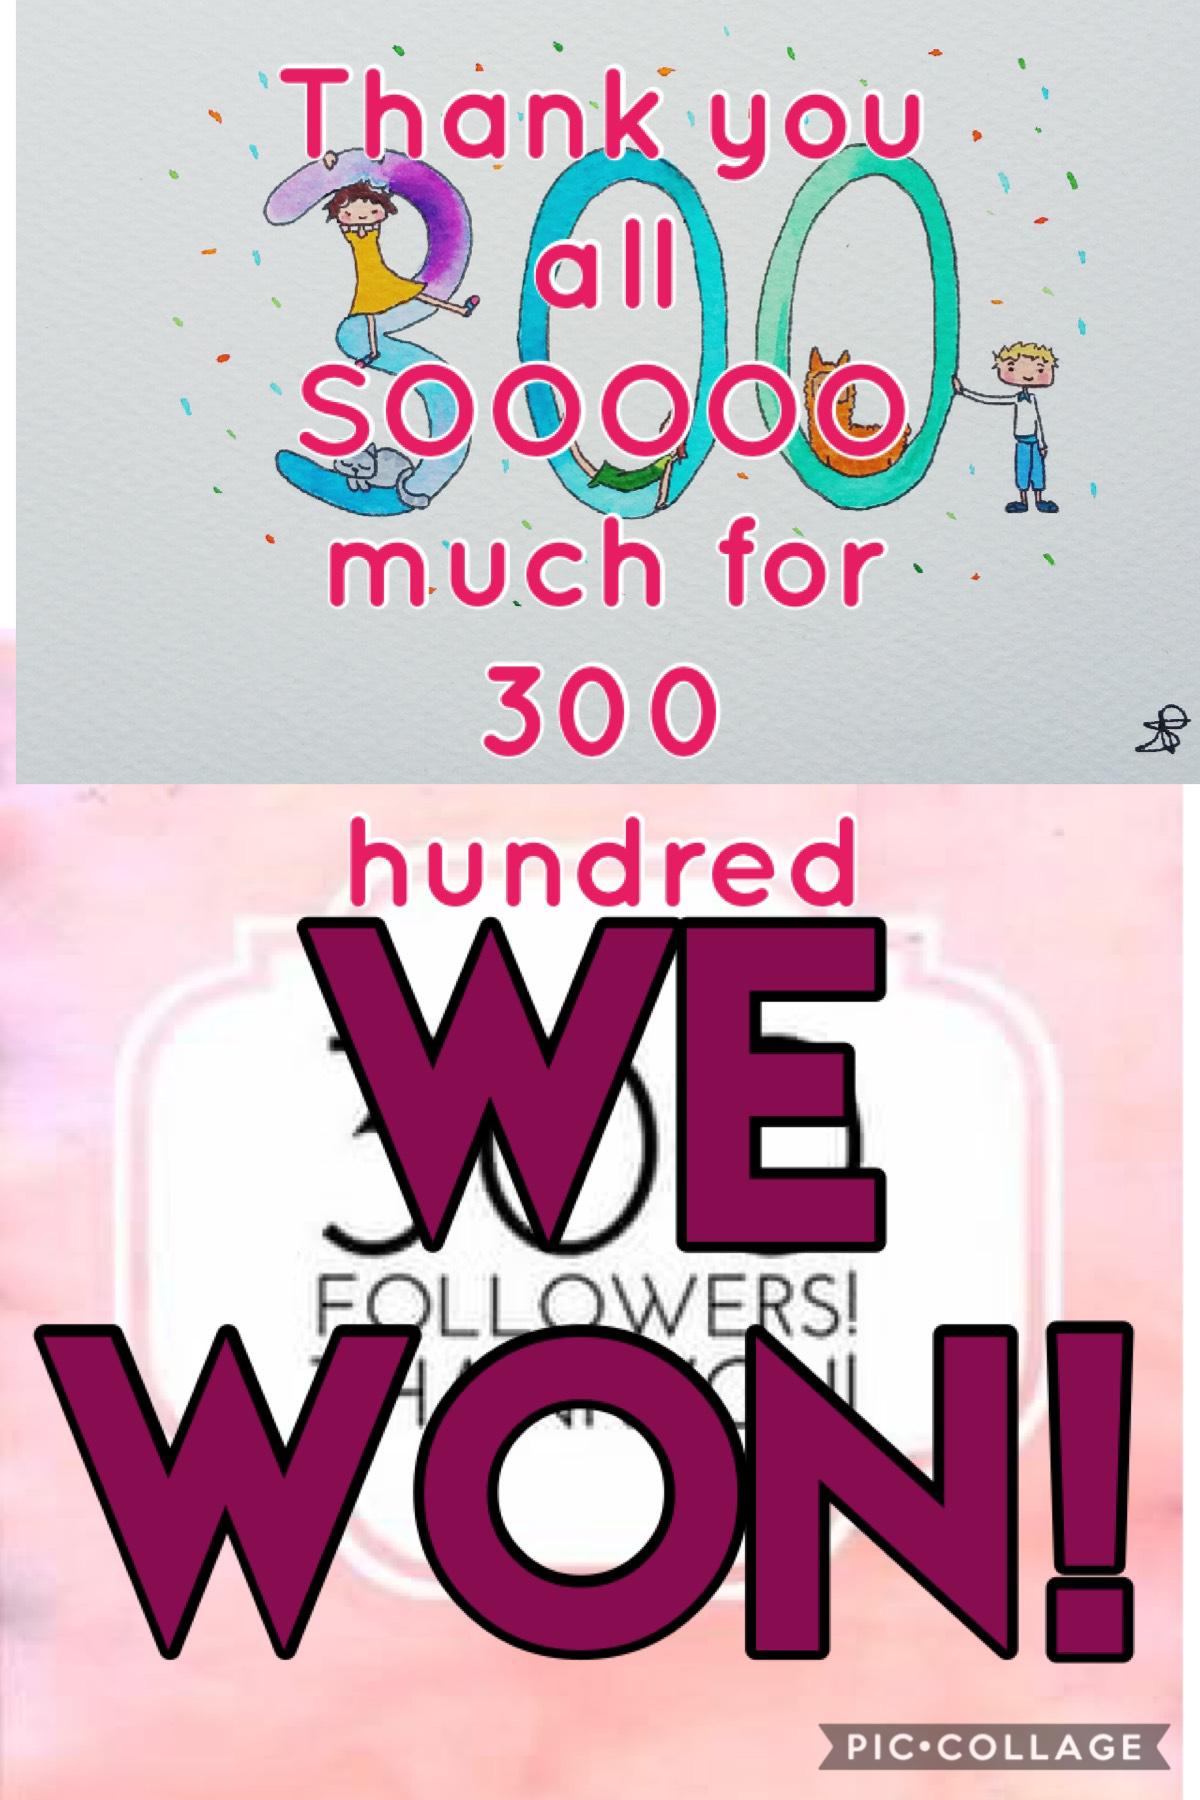 THANK YOU ALL SOOOOO MUCH WE WON!!! I am going to give a shout out to my 300th follower